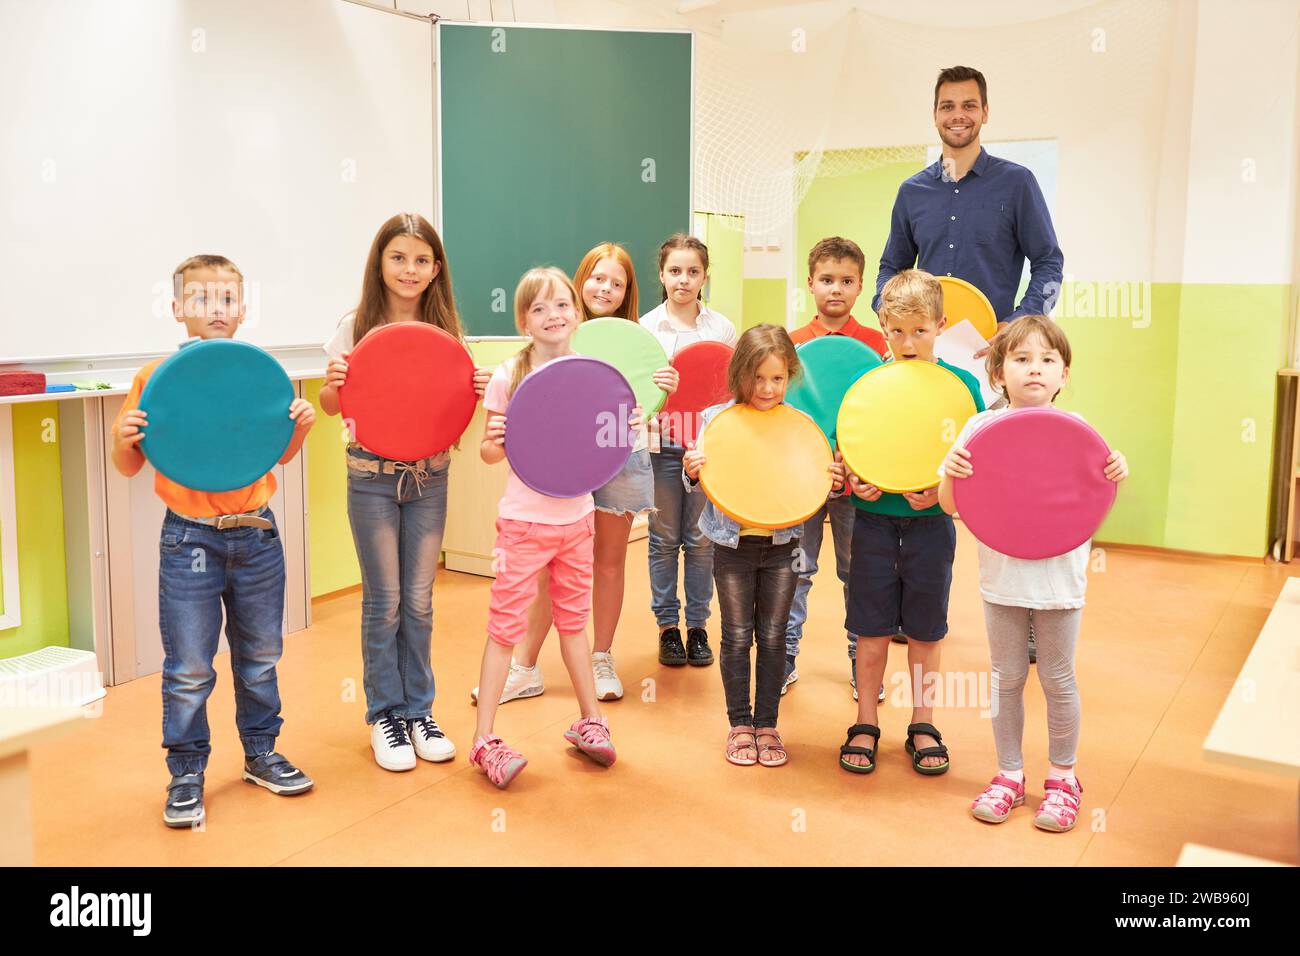 Group of elementary students holding circle shaped seat cushions while standing with teacher in classroom Stock Photo